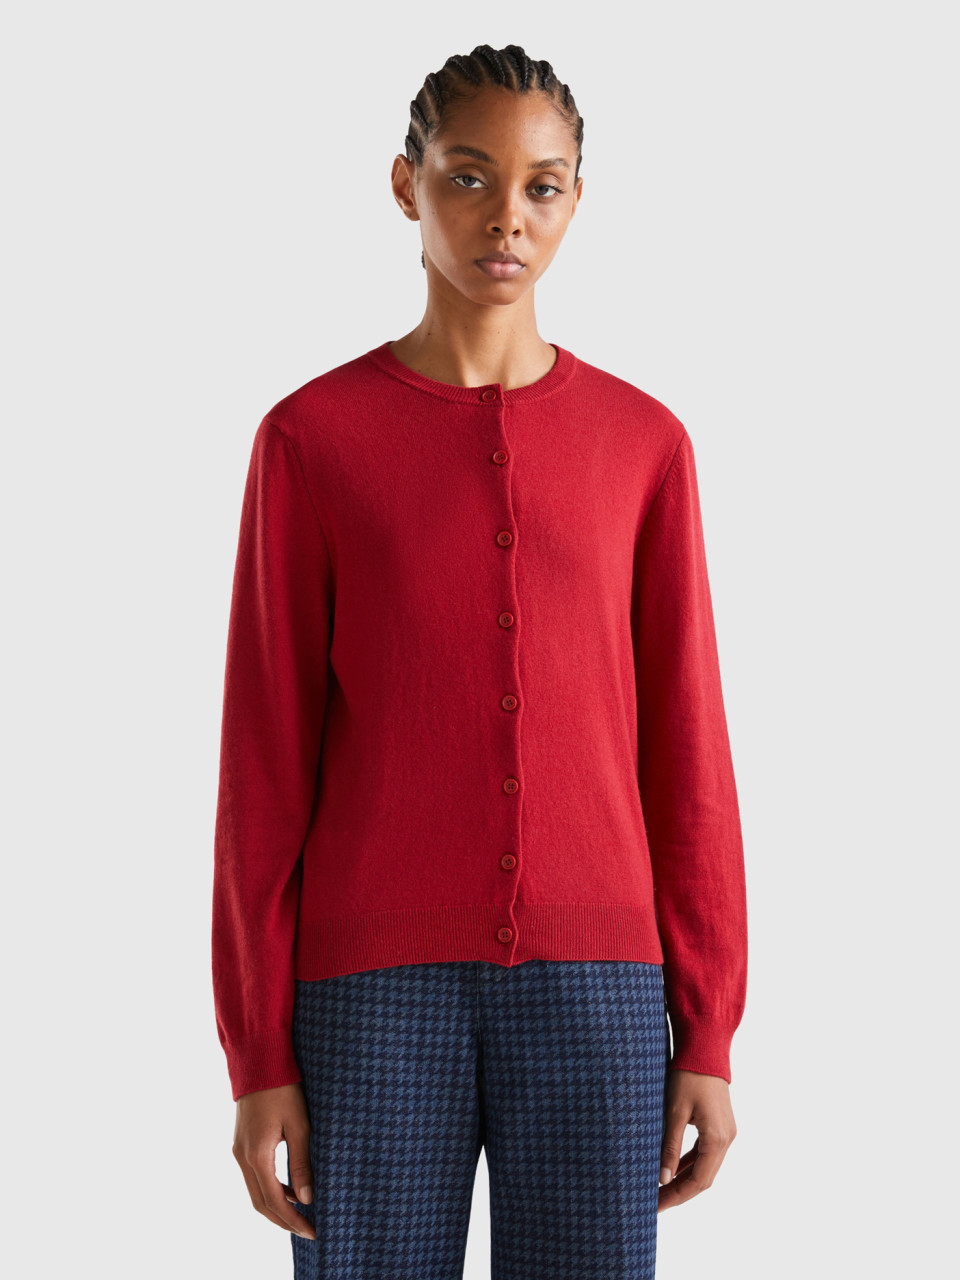 Benetton, Brick Red Cardigan In Cashmere And Wool Blend, Brick Red, Women